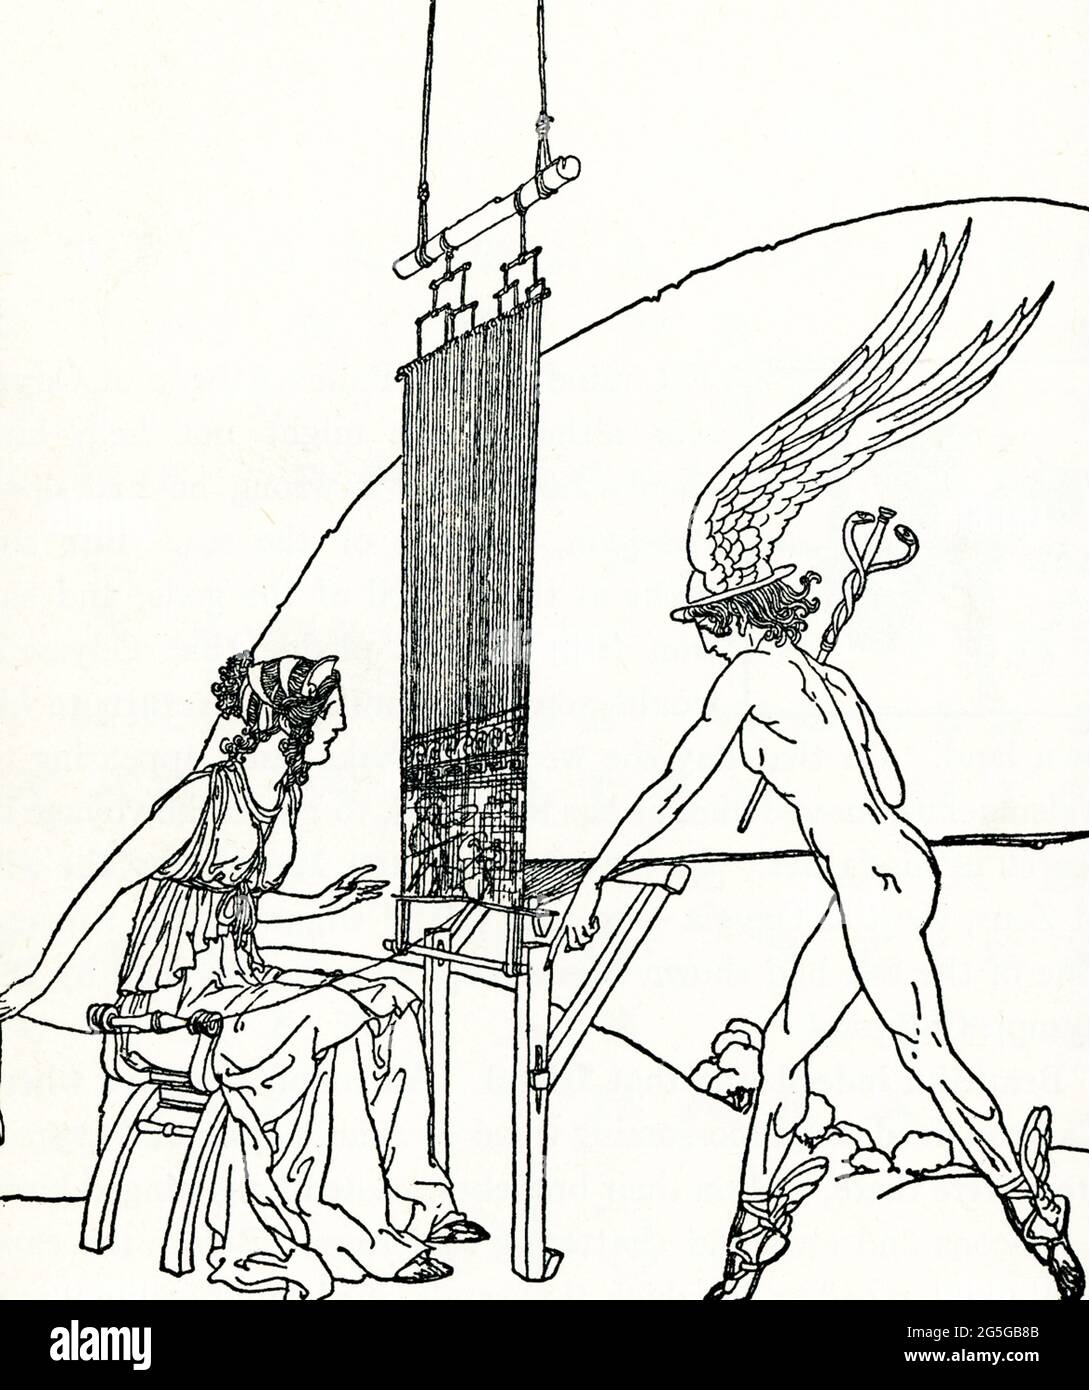 The 1918 caption reads: “Hermes visits Calypso in her cave and says that Zeus wants her to  let Odysseus go.” In Greek mythology, Calypso is the daughter of the Titan Atlas (also known as Oceanus and Nereus). She is a nymph of the mythical island of Ogygia. In Homer's Odyssey, Book V (also Books I and VII), she entertained the Greek hero Odysseus for seven years, but she could not overcome his longing for home even by promising him immortality. Here, the god Hermes delivers to Calypso the message from Zeus that she needs to let Odysseus return to Ithaca. She obeys. Stock Photo